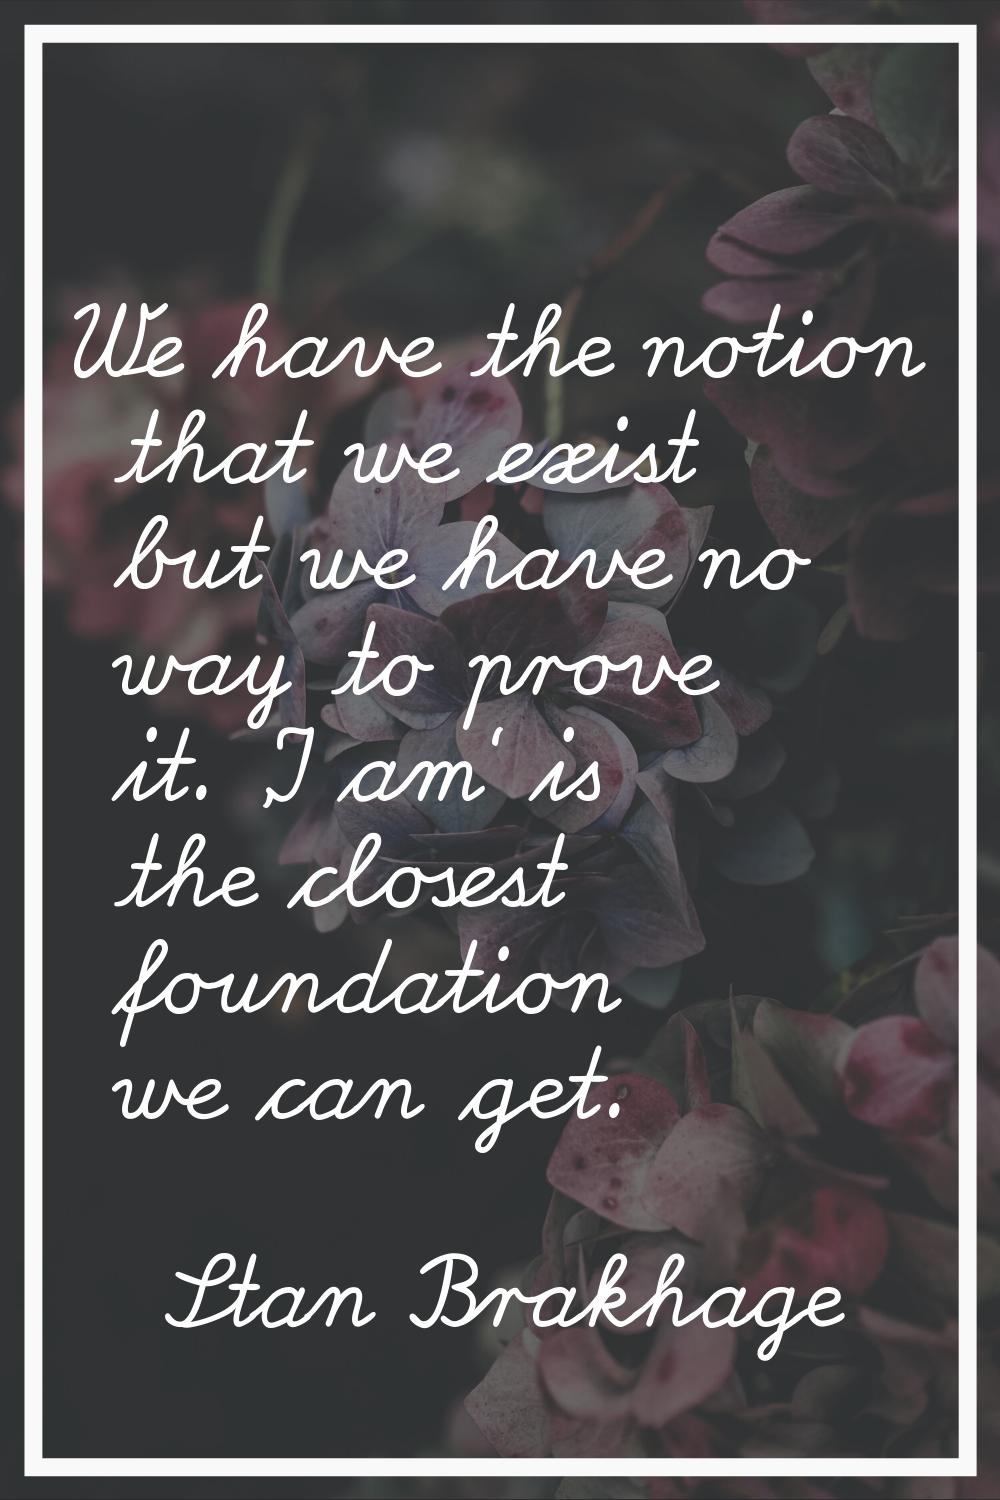 We have the notion that we exist but we have no way to prove it. 'I am' is the closest foundation w